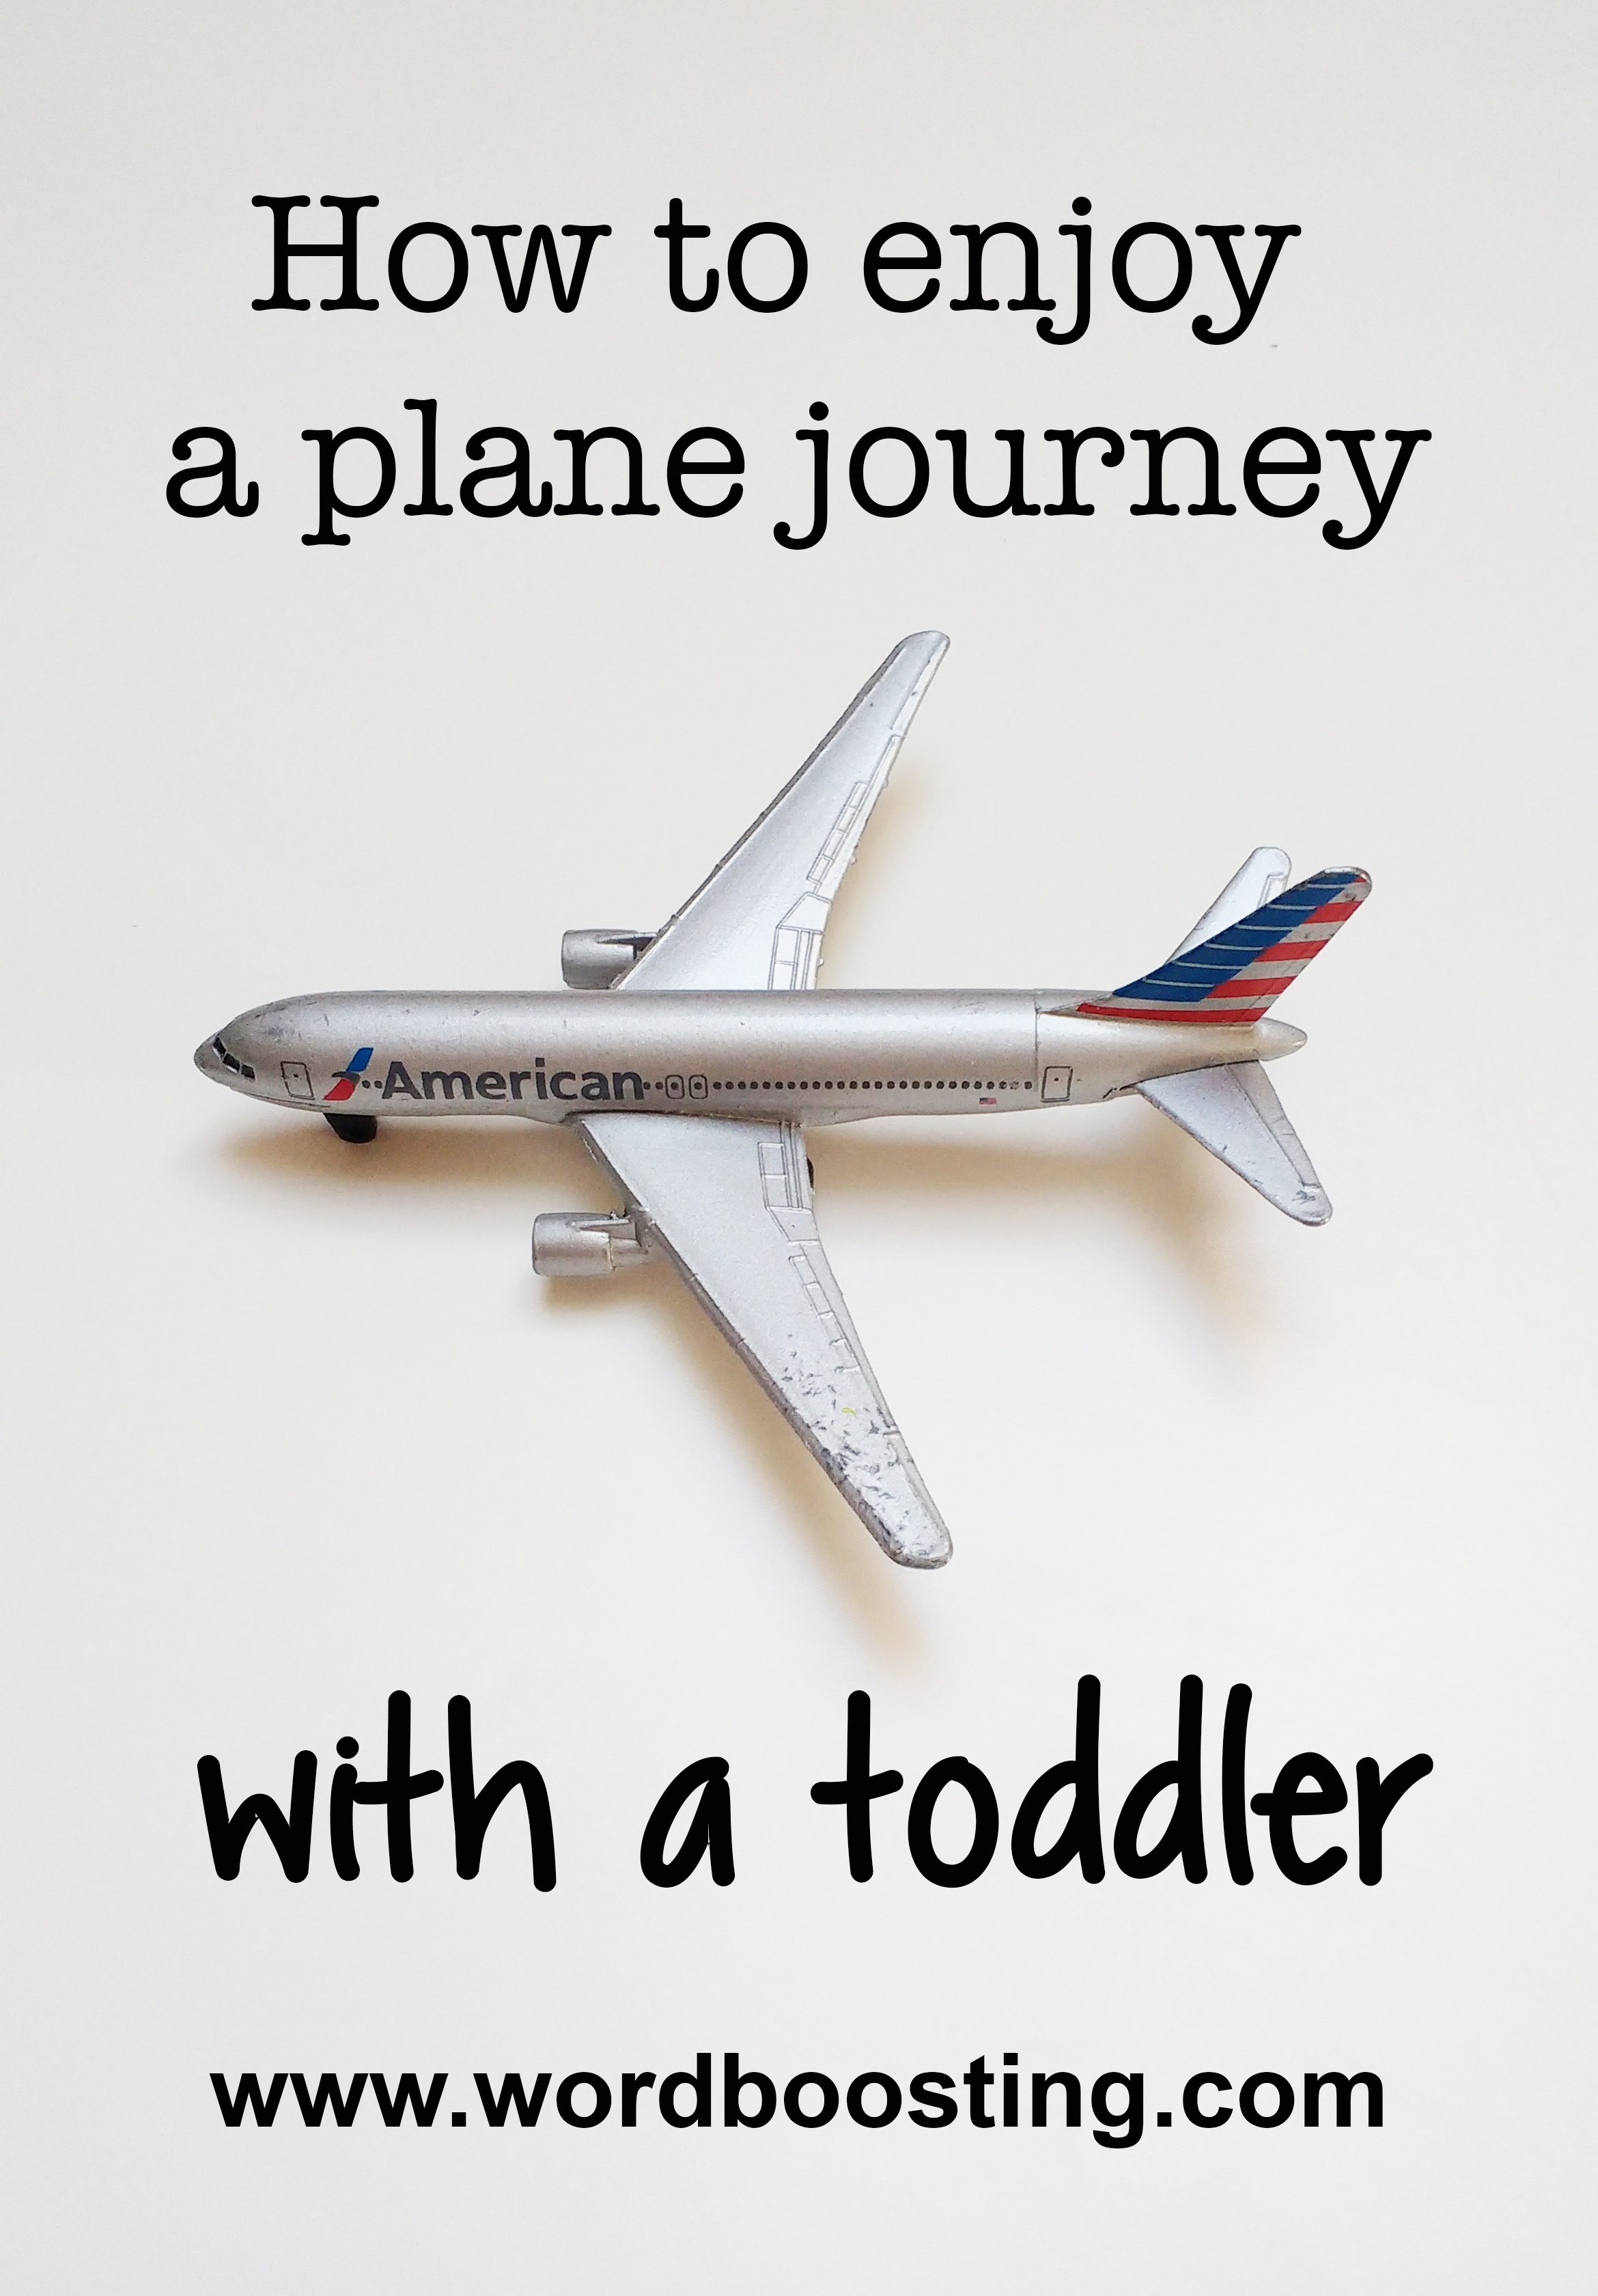 Word Boosting » How to enjoy a plane journey with a toddler (or two)